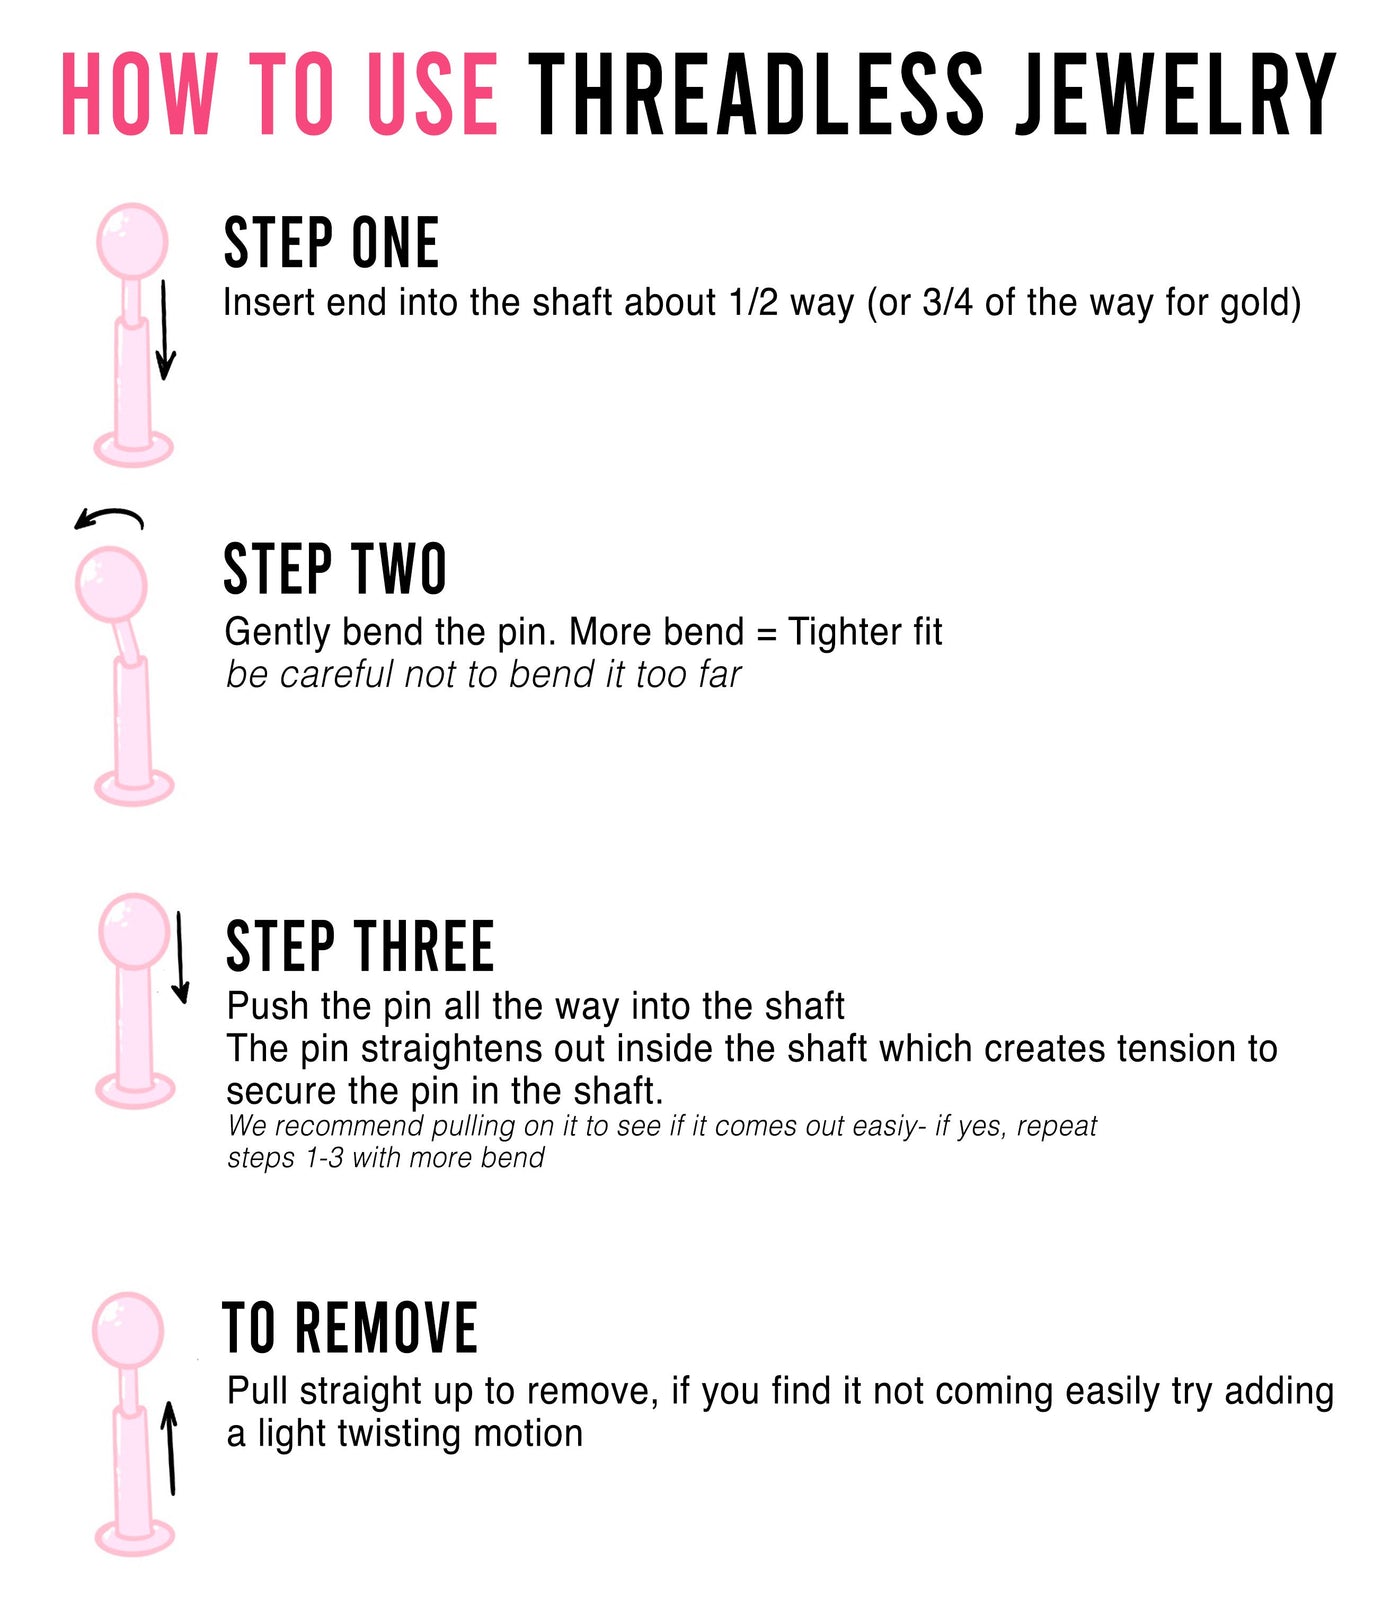 instructions for putting in threadless body piercings